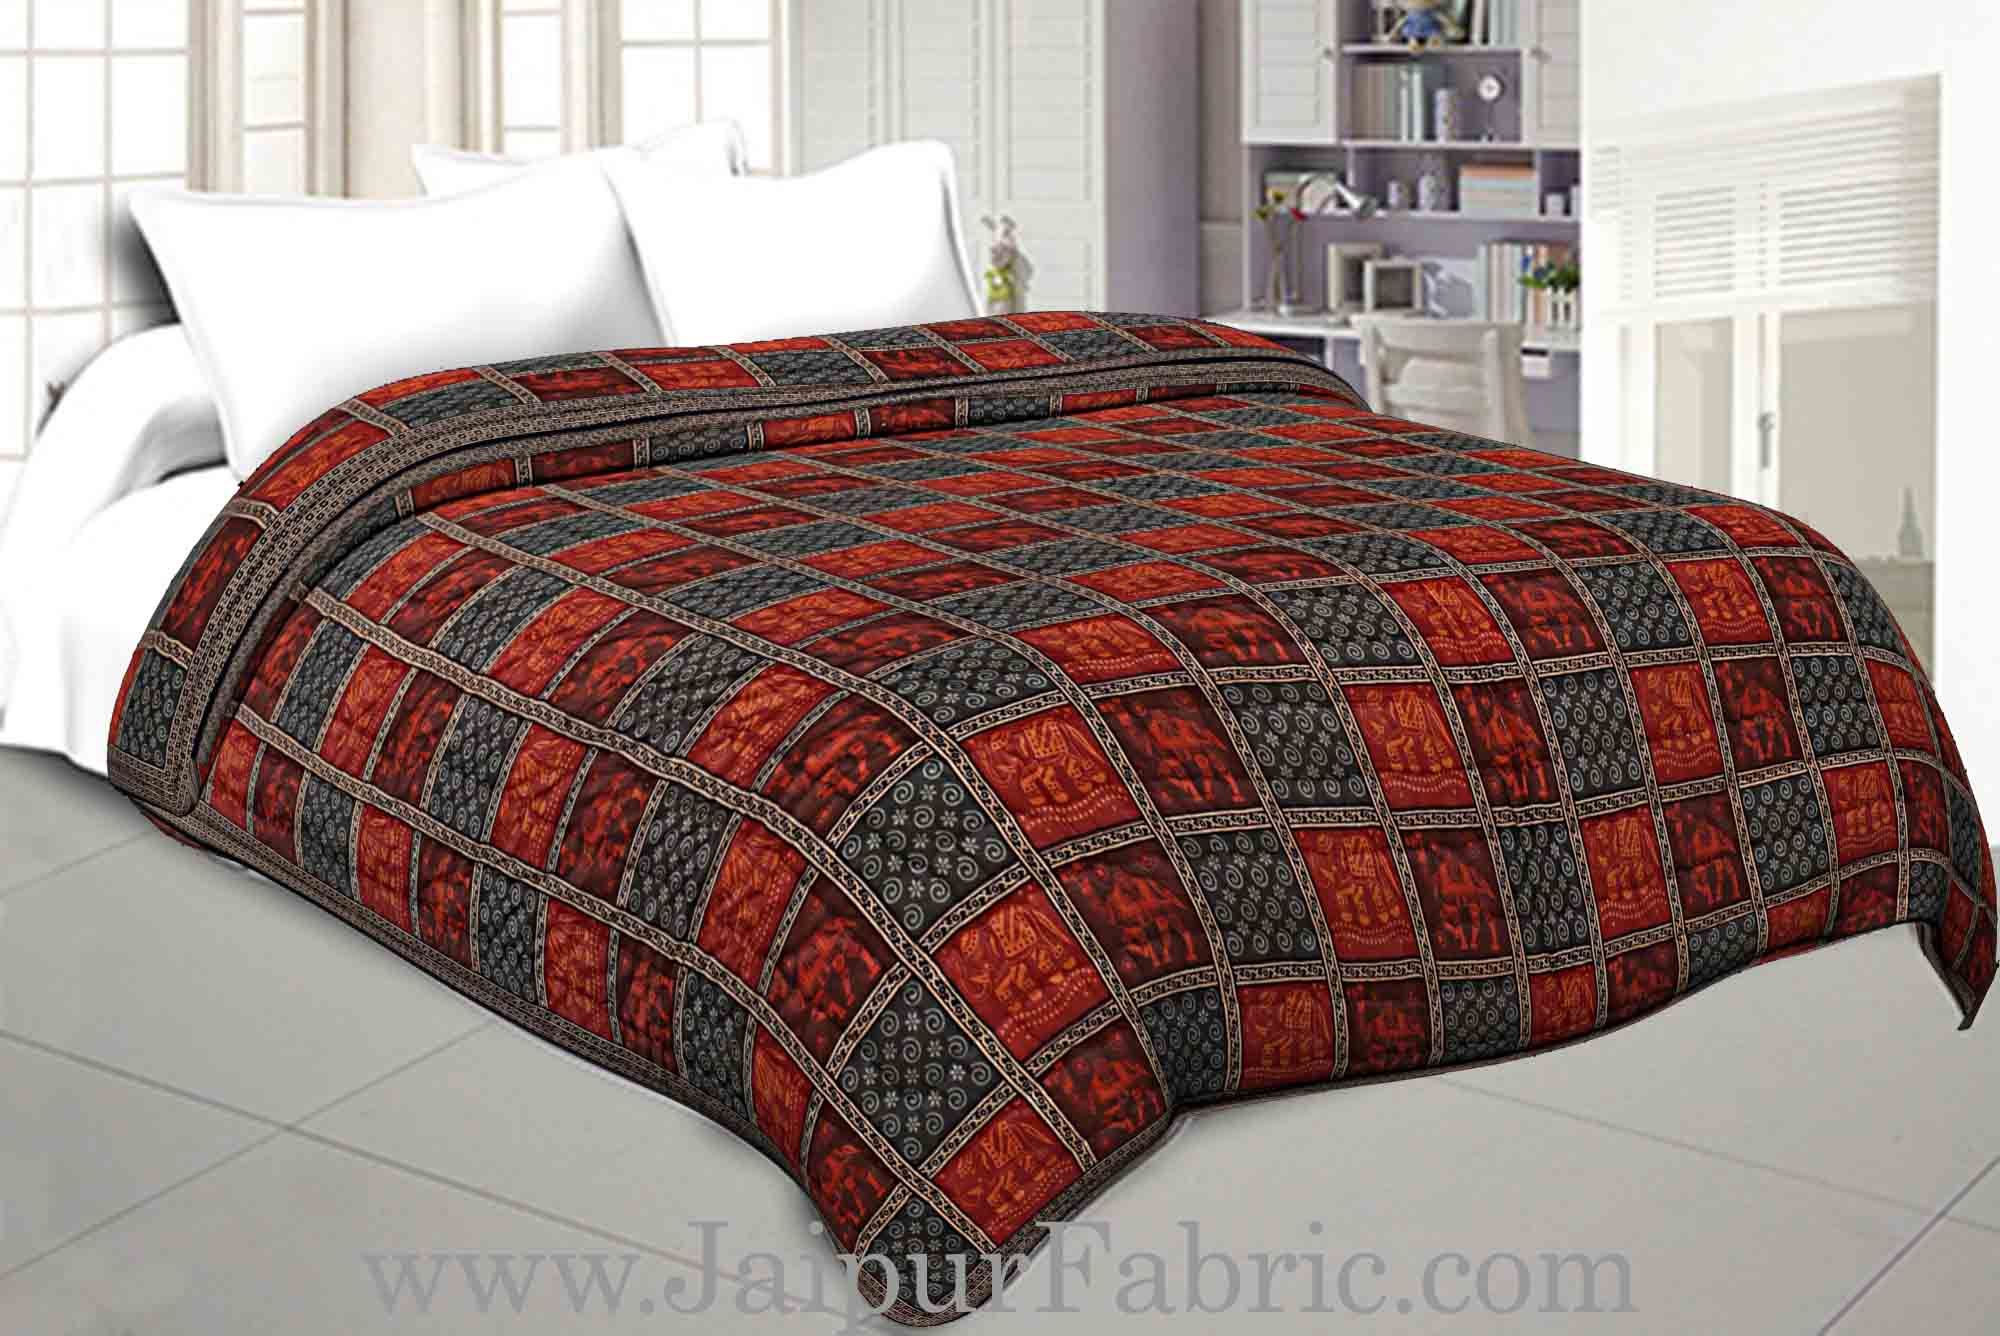 Double Bed Quilt Check & Dabu With Elephant And Camel Print Cotton (Multicolour)